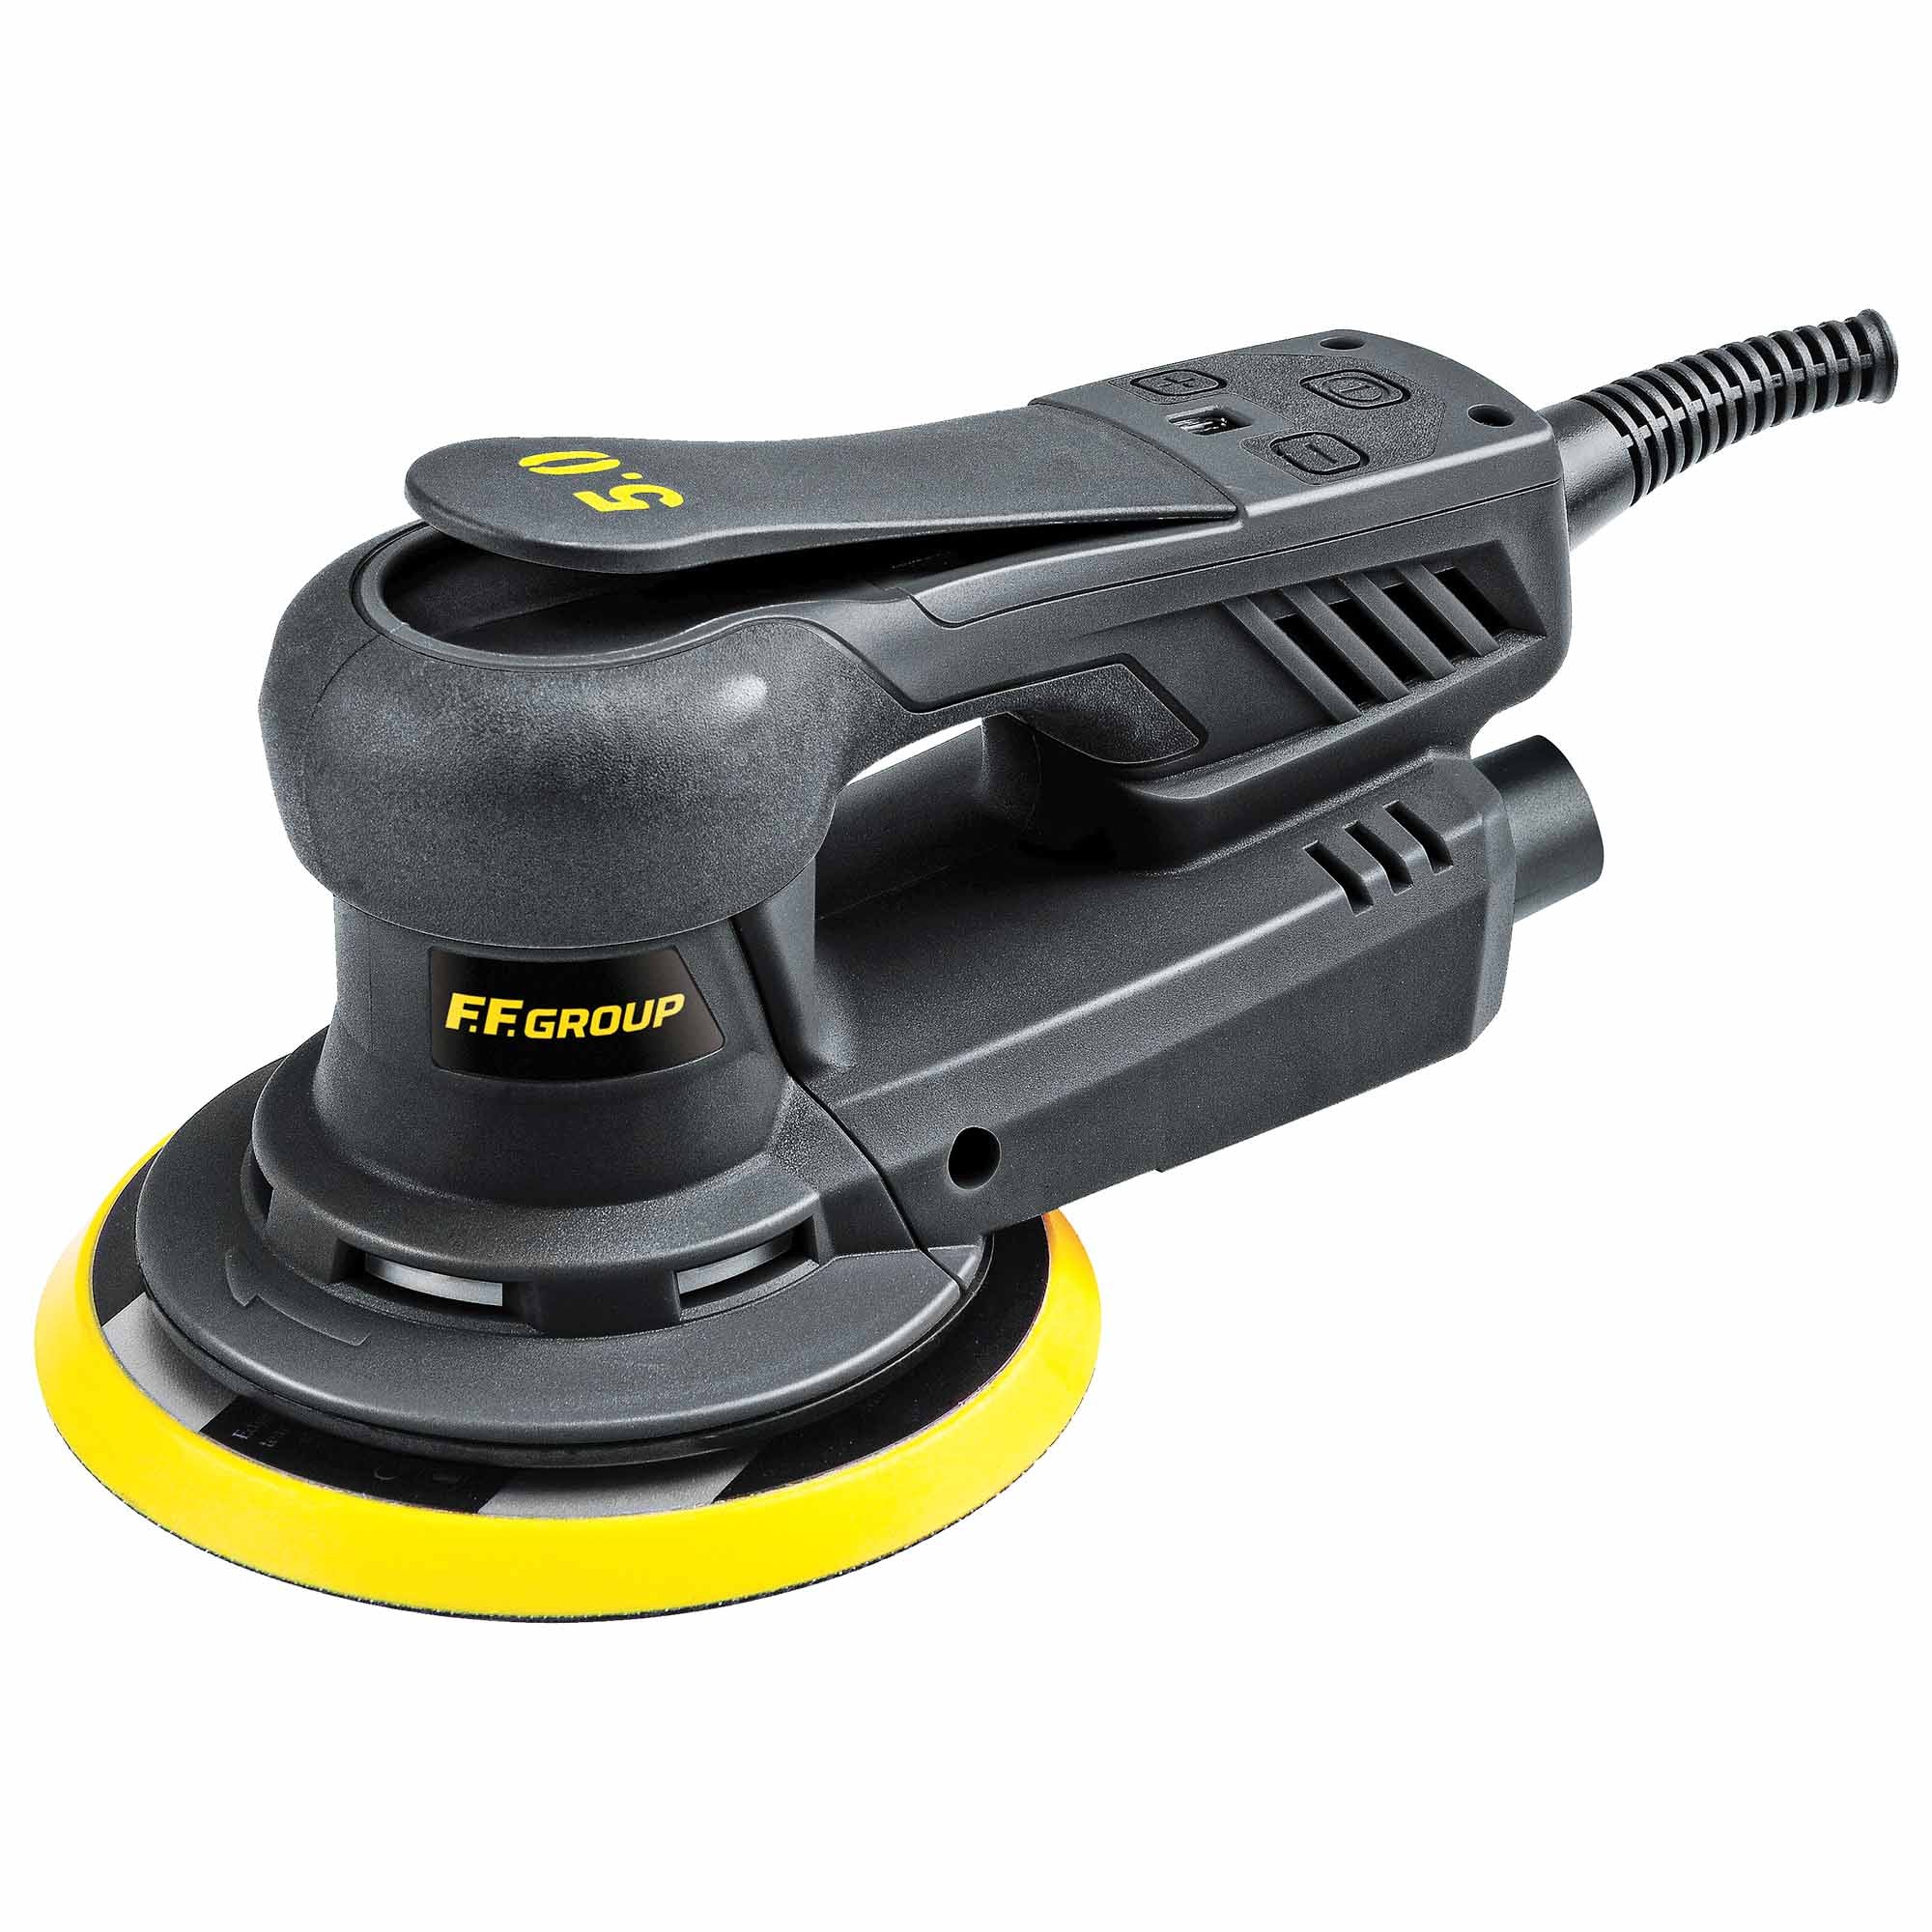 Ponceuse FFgroup ROS 150 BL PRO 350W